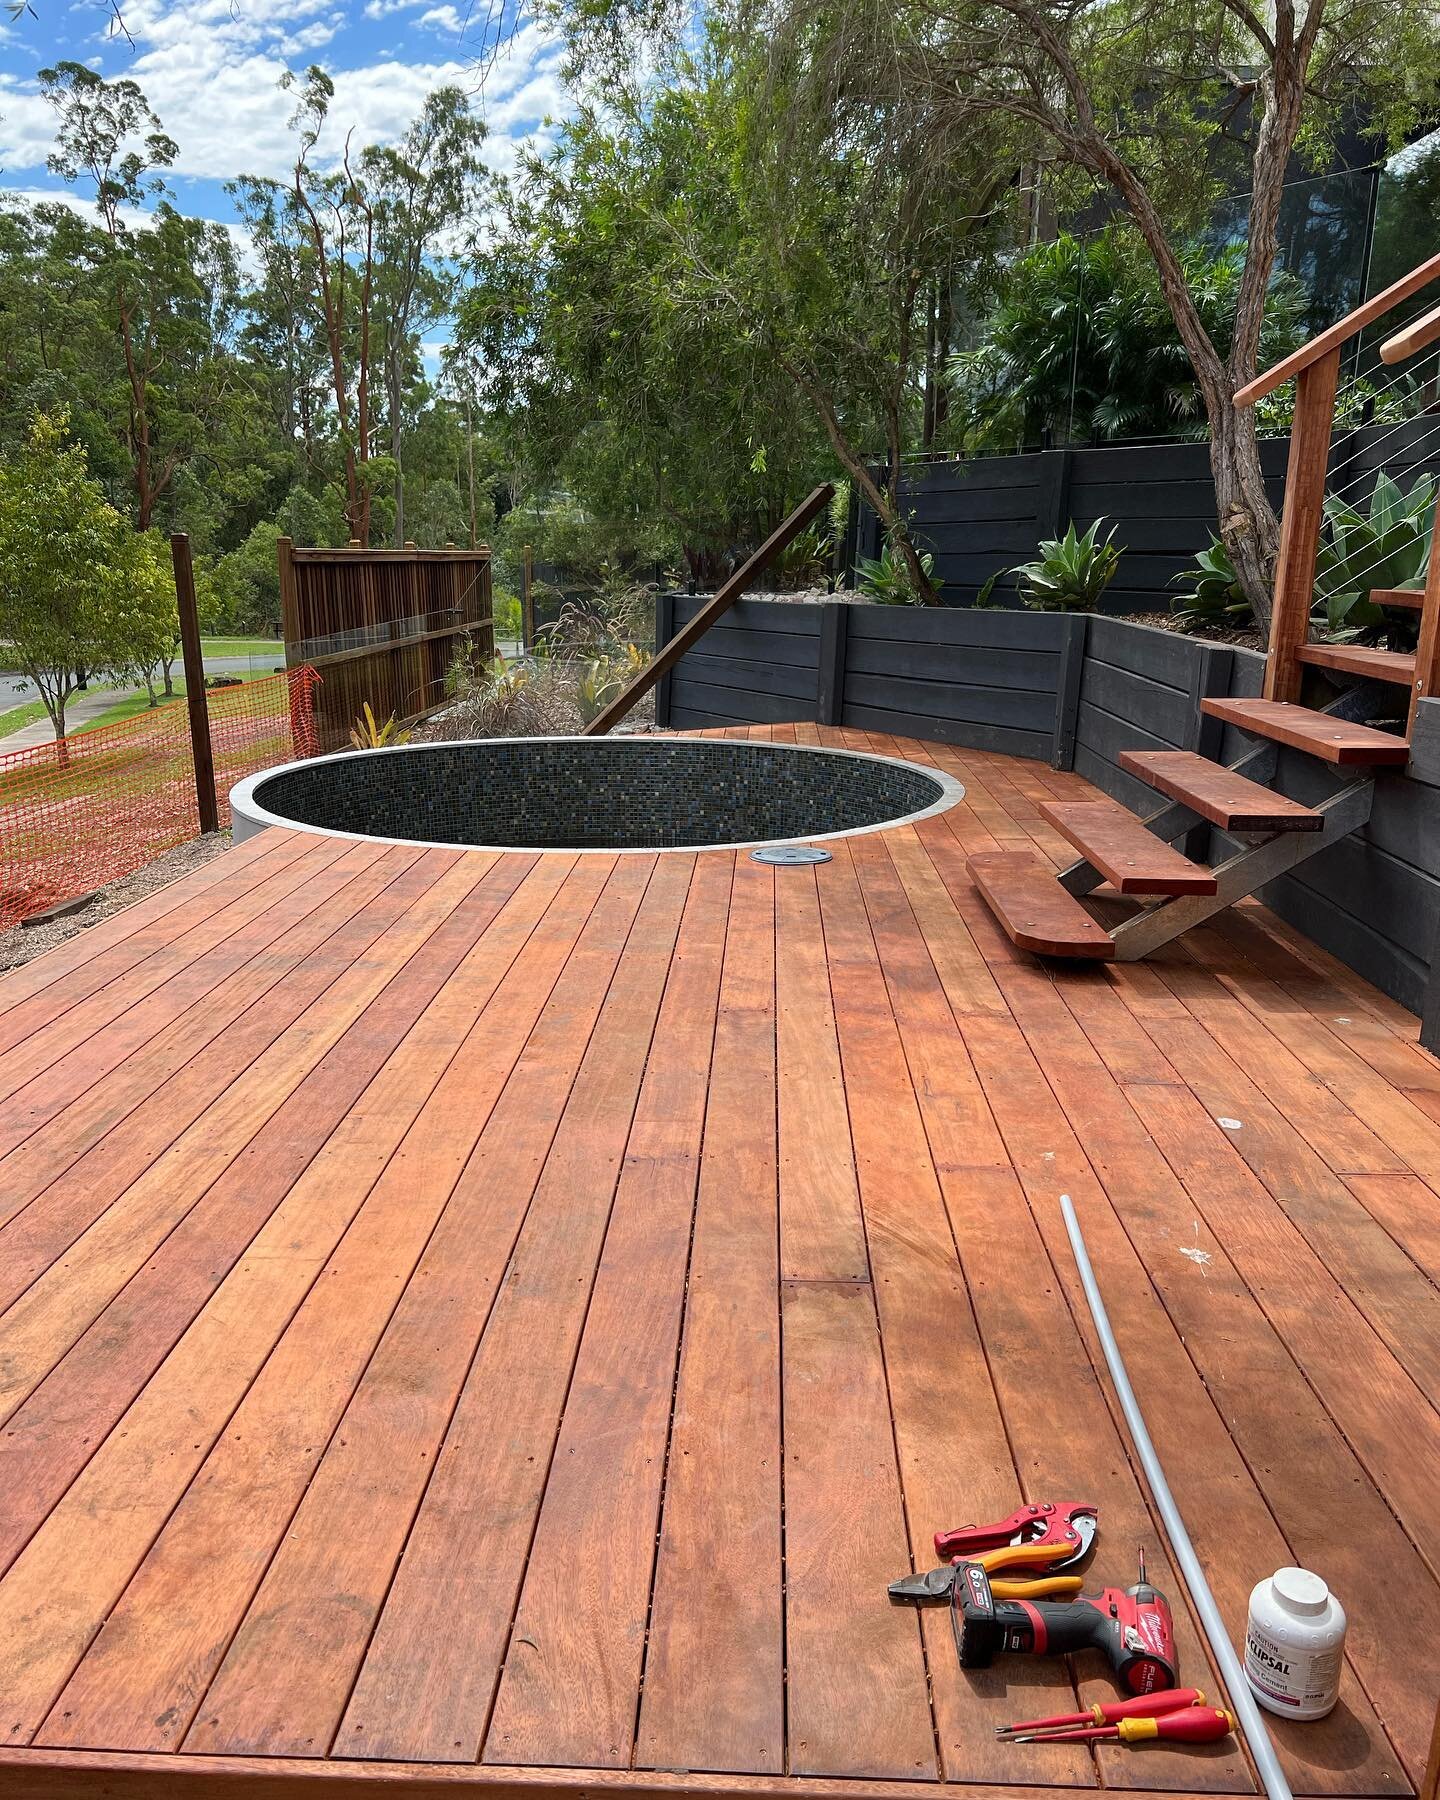 Newly completed pool and deck ready to spend the rest of those hot sunny coast days⛱🏊🏻&zwj;♀️

We installed power for pool pumps, heater &amp; lights for this customer in Landsborough 👍

📲 0417 129 484 
📧info@templetonelectrical.com.au
💻www.tem